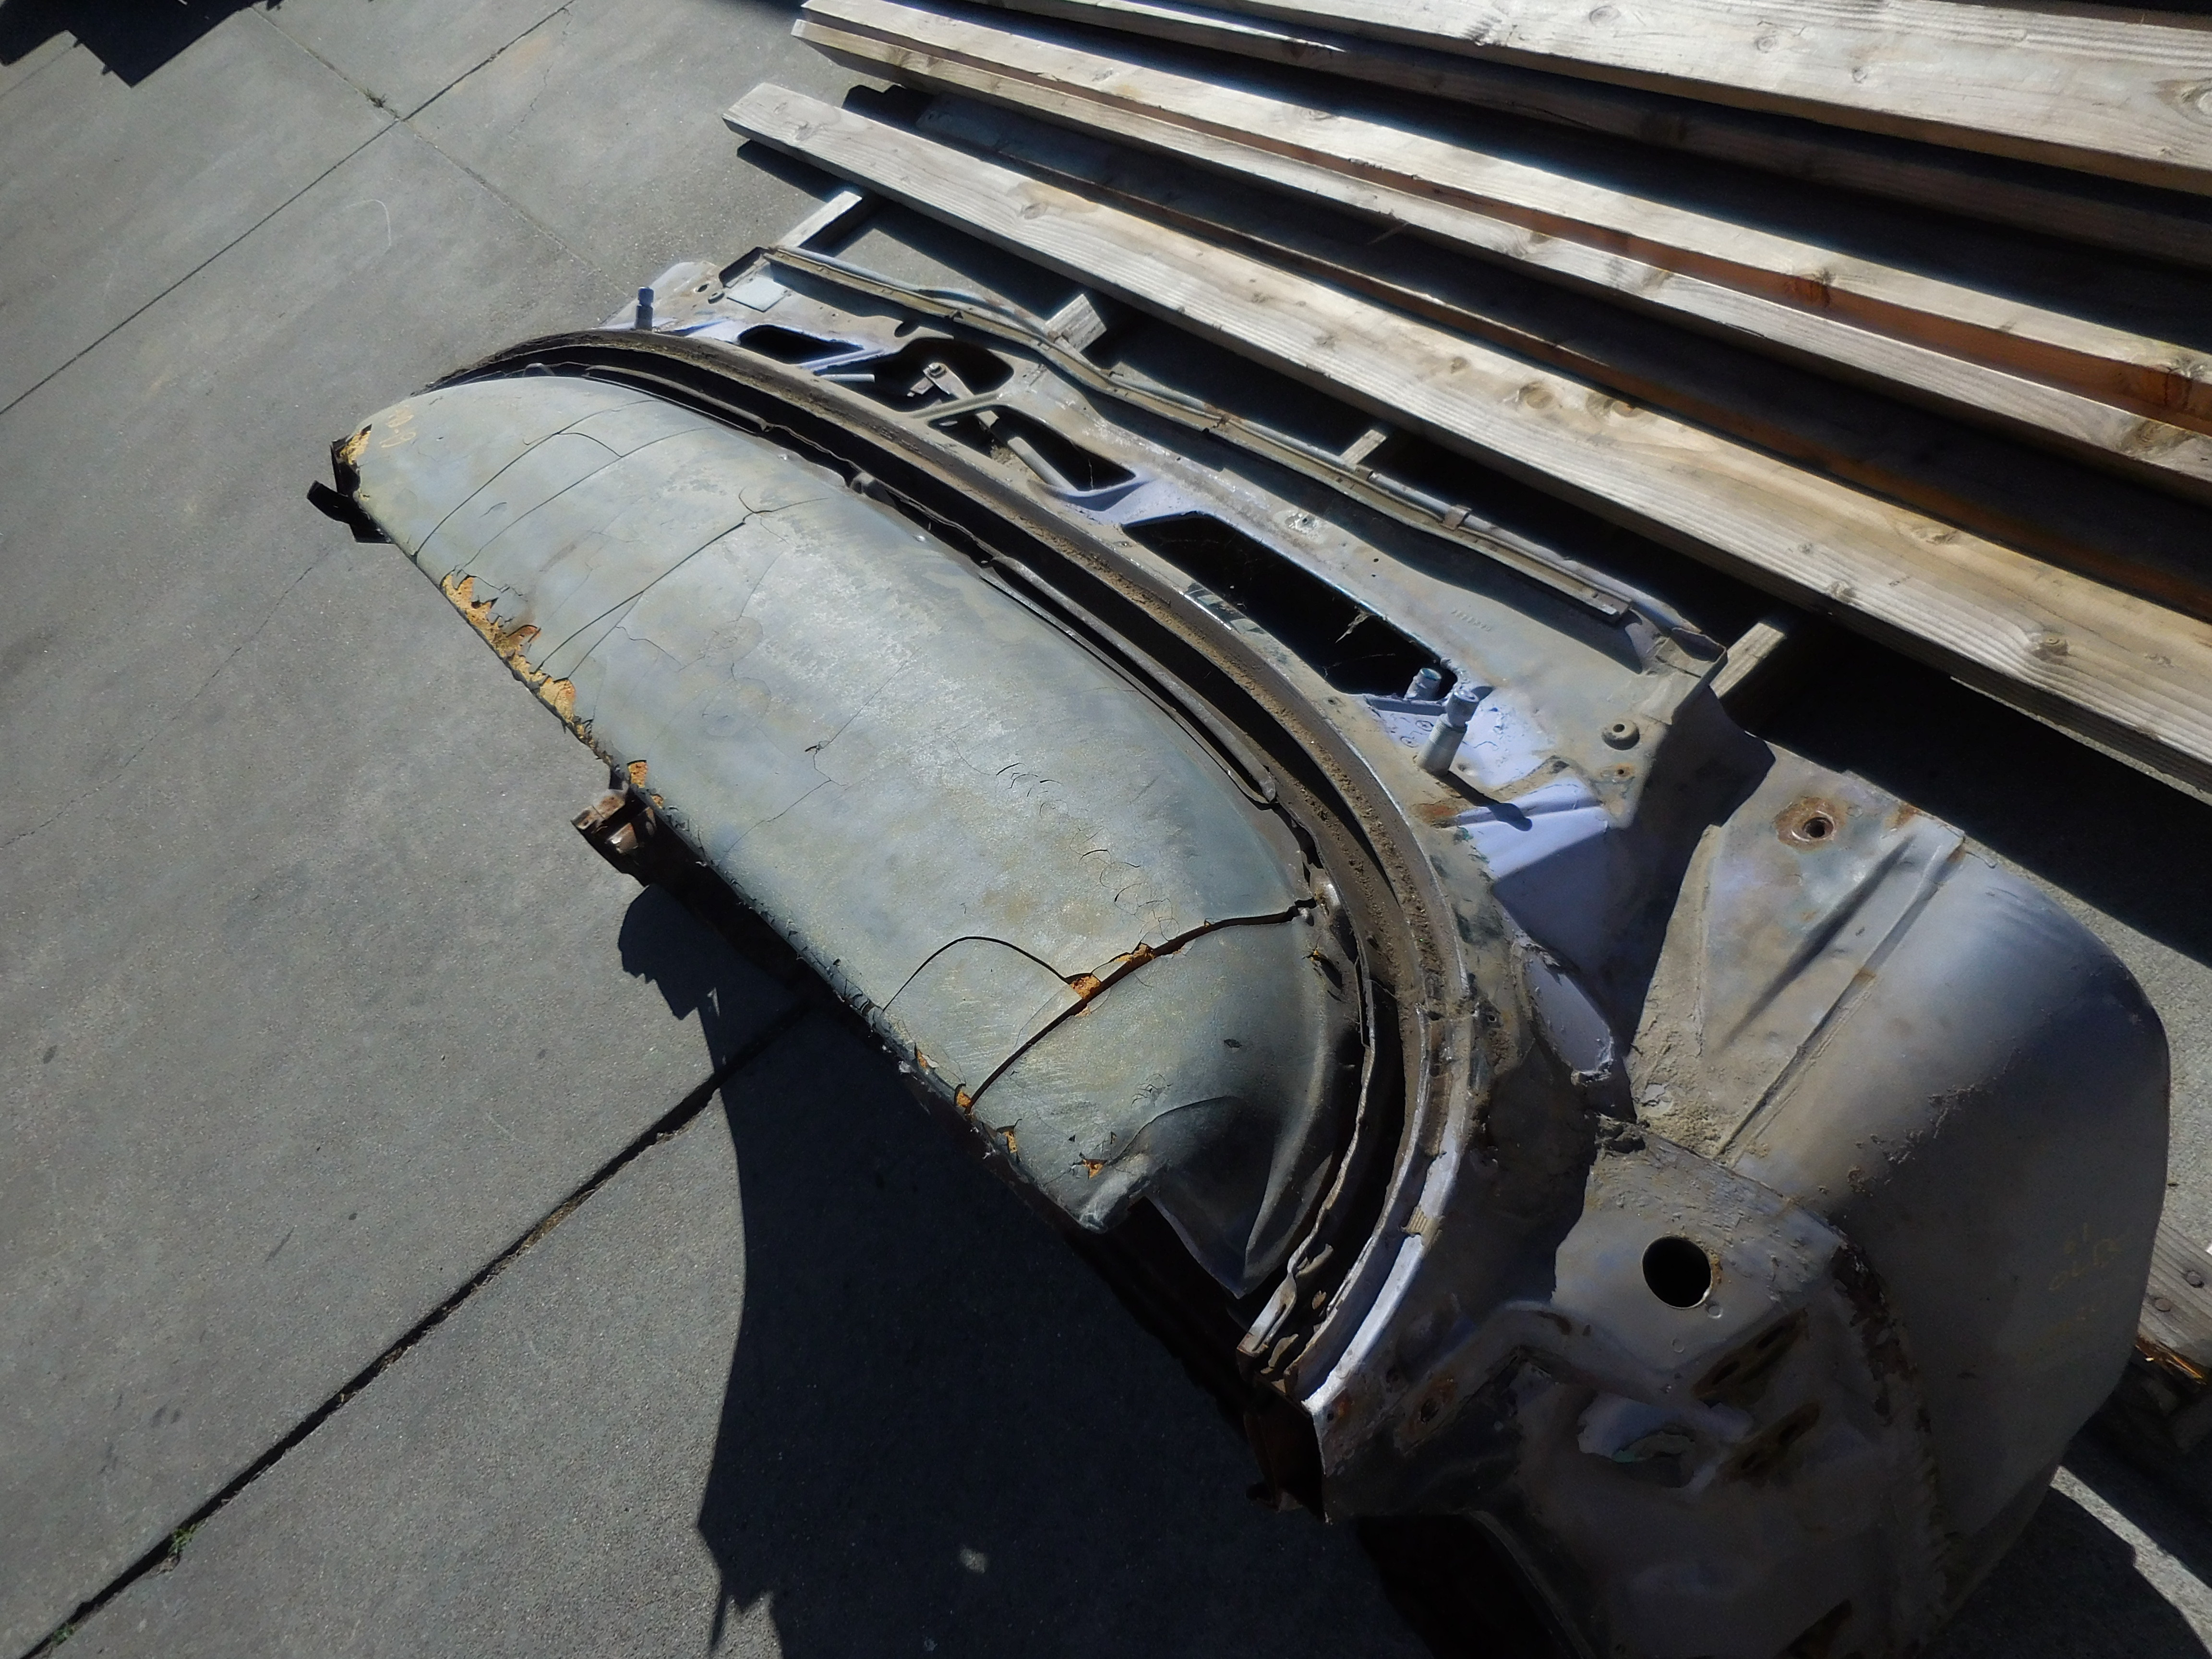 1961, Oldsmobile, Full, Size, Cowl, Section, and, Firewall, Cut,